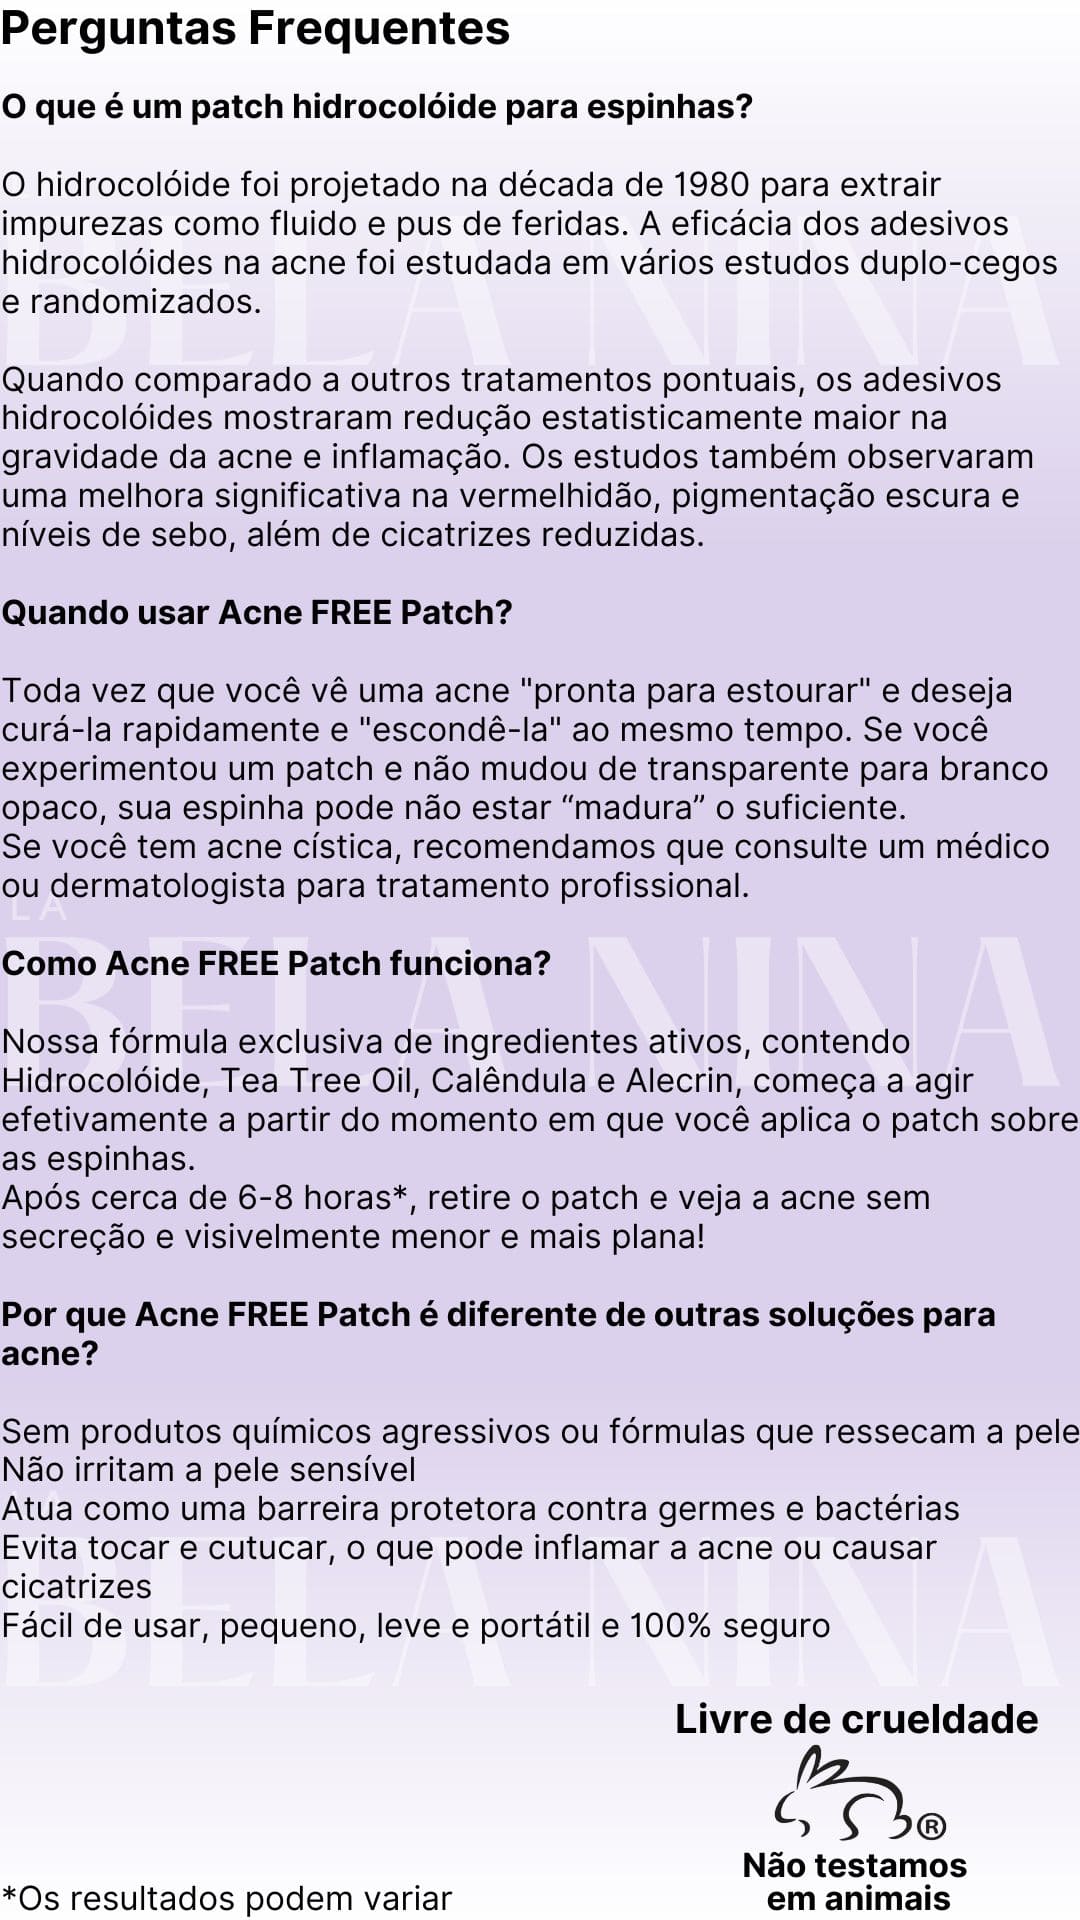 acne free patch